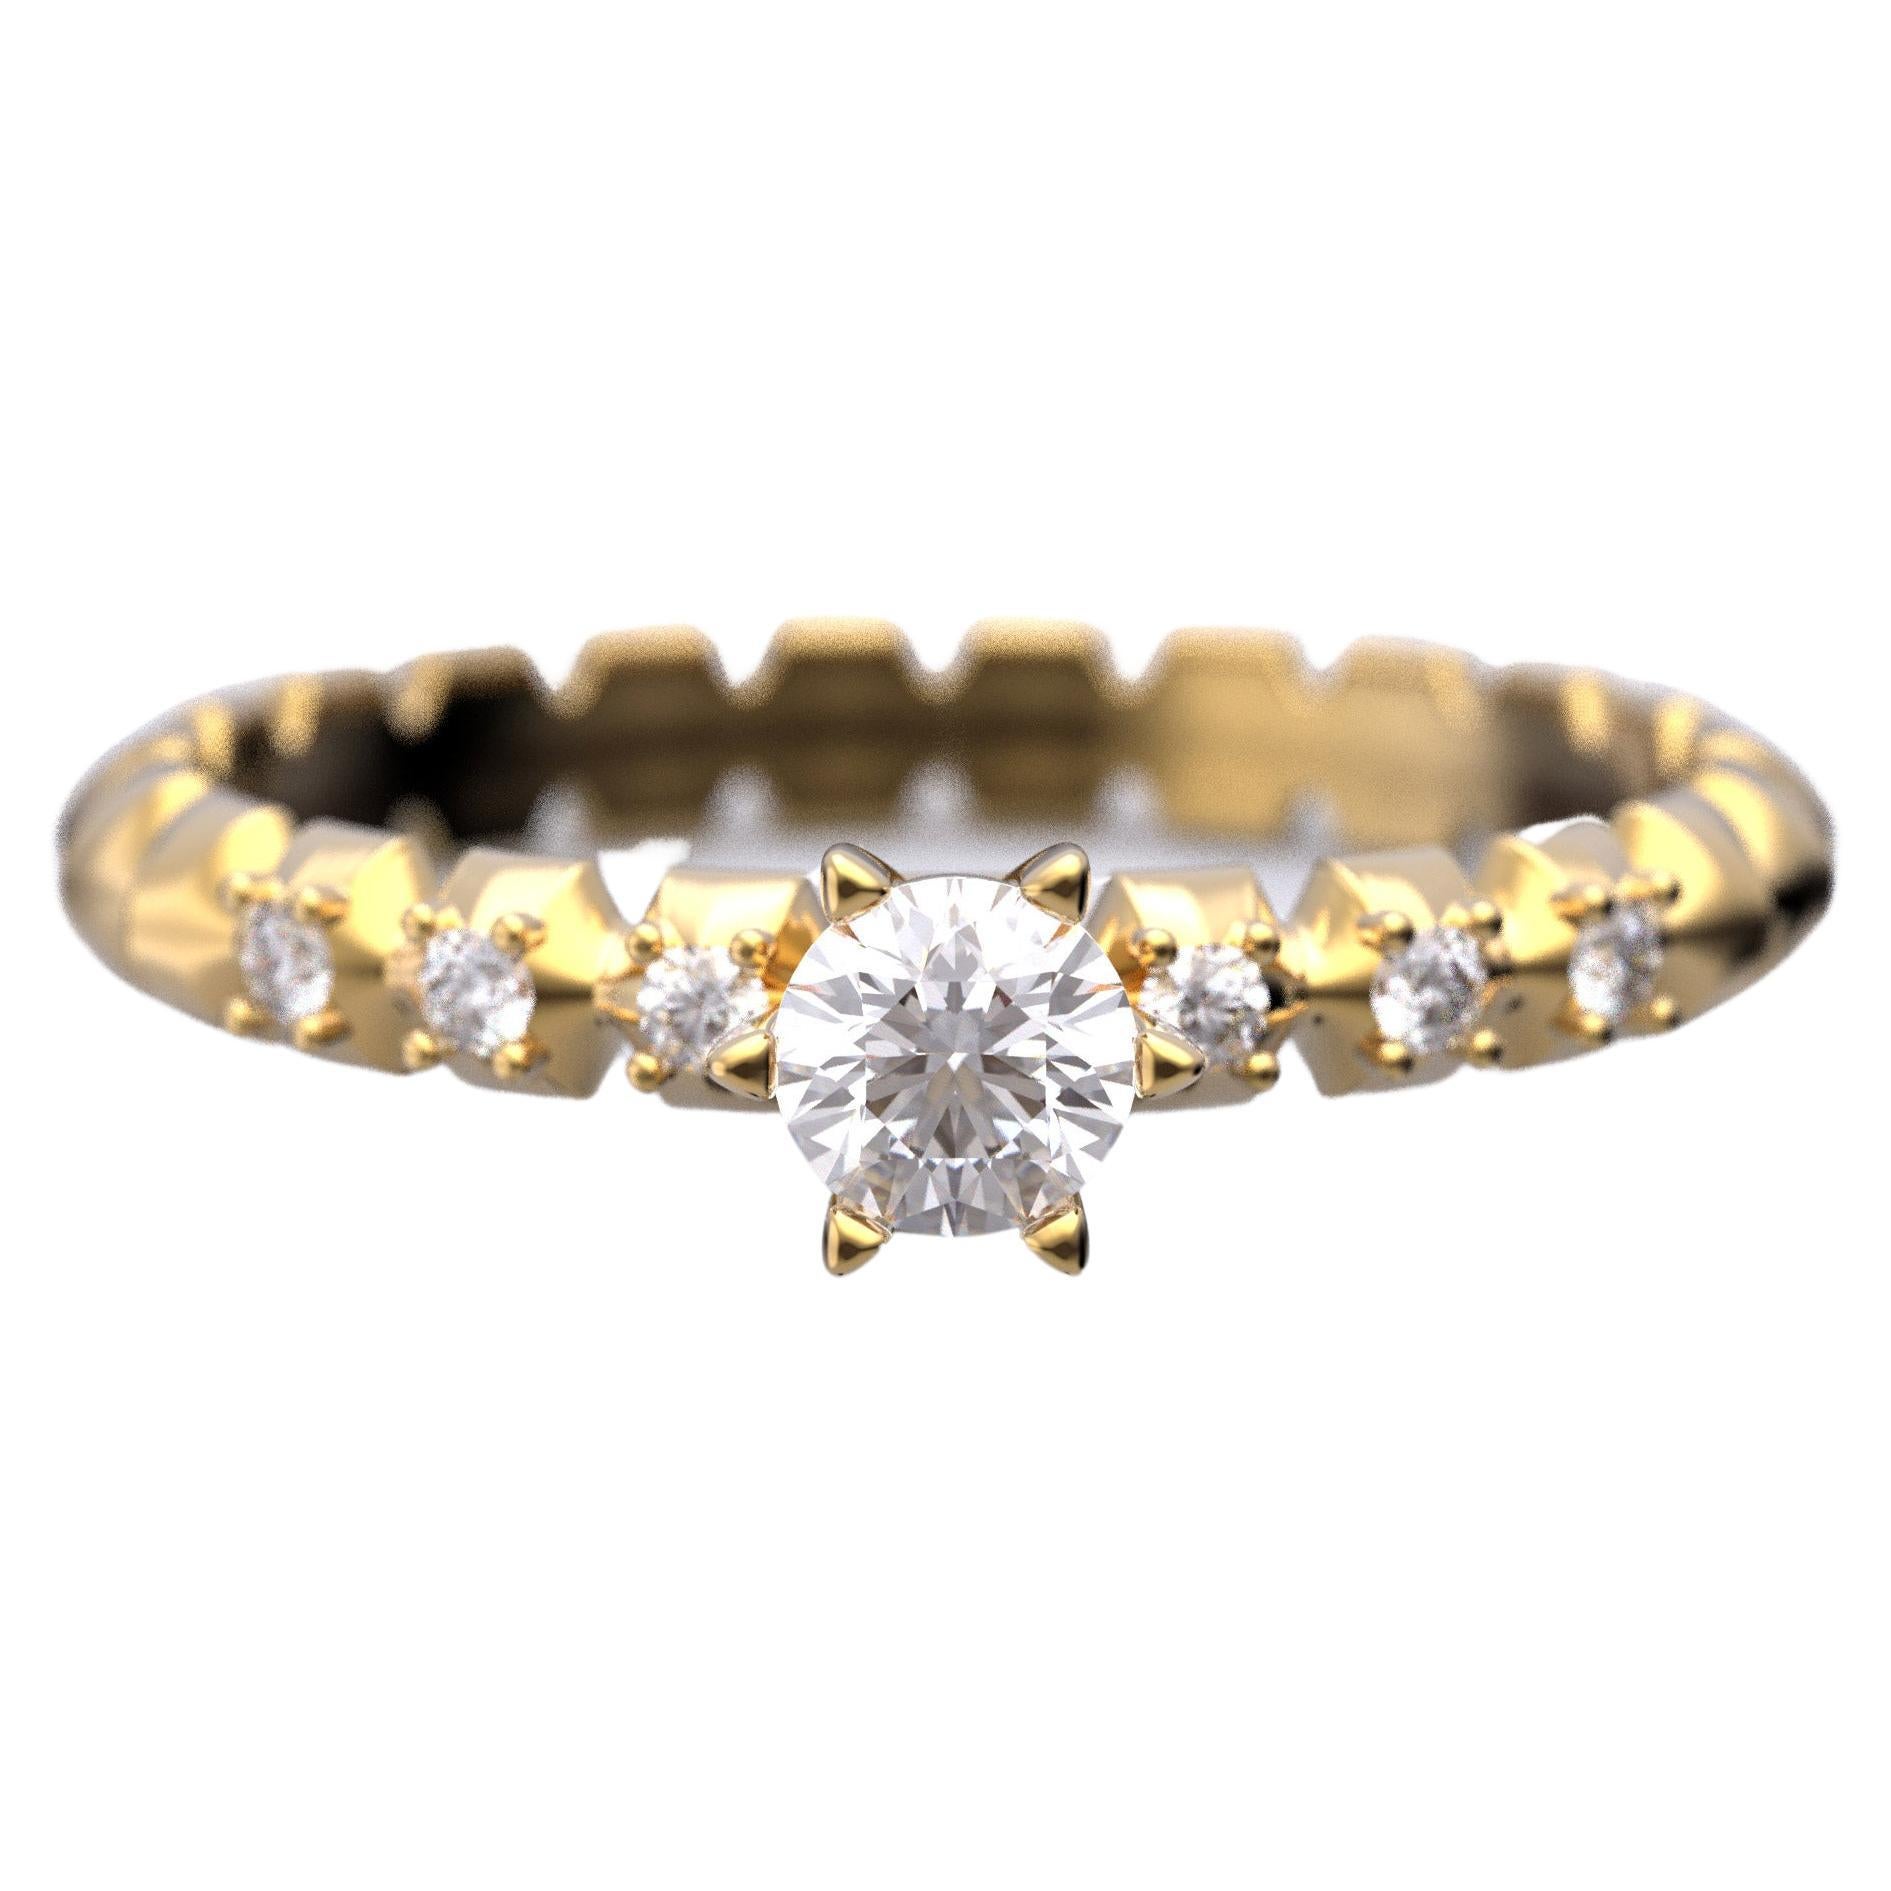 For Sale:  Italian-Made 0.32 Carat Diamond Engagement Ring in 14k Solid Gold